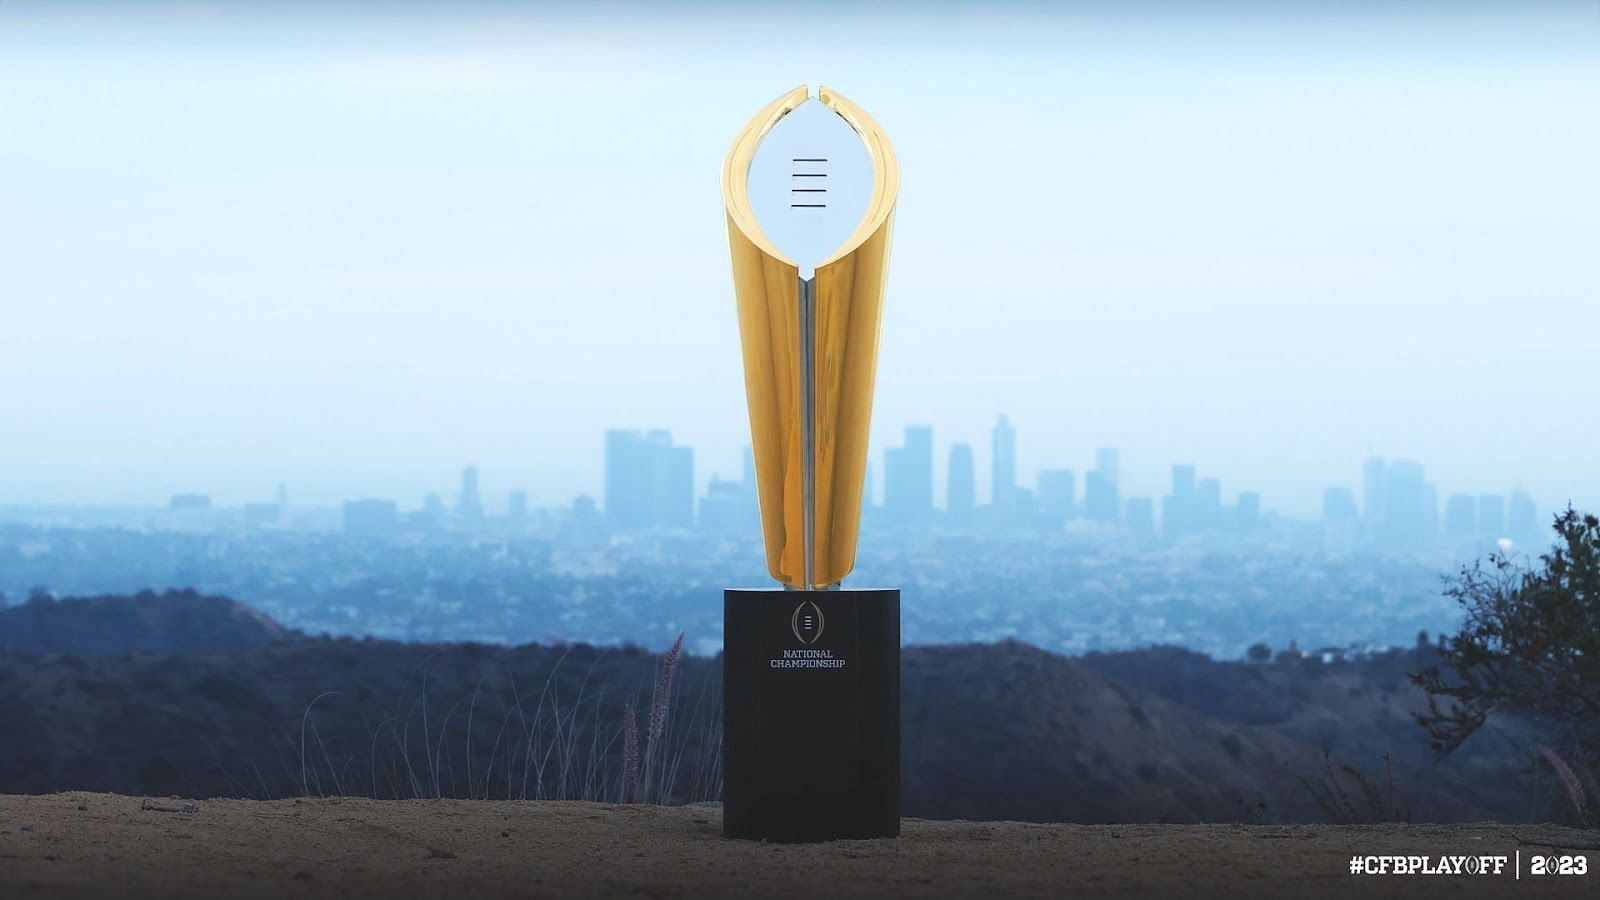 College Football National Championship Award. Source: College Football Playoff&rsquo;s official Facebook handle @CollegeFootballPlayoff